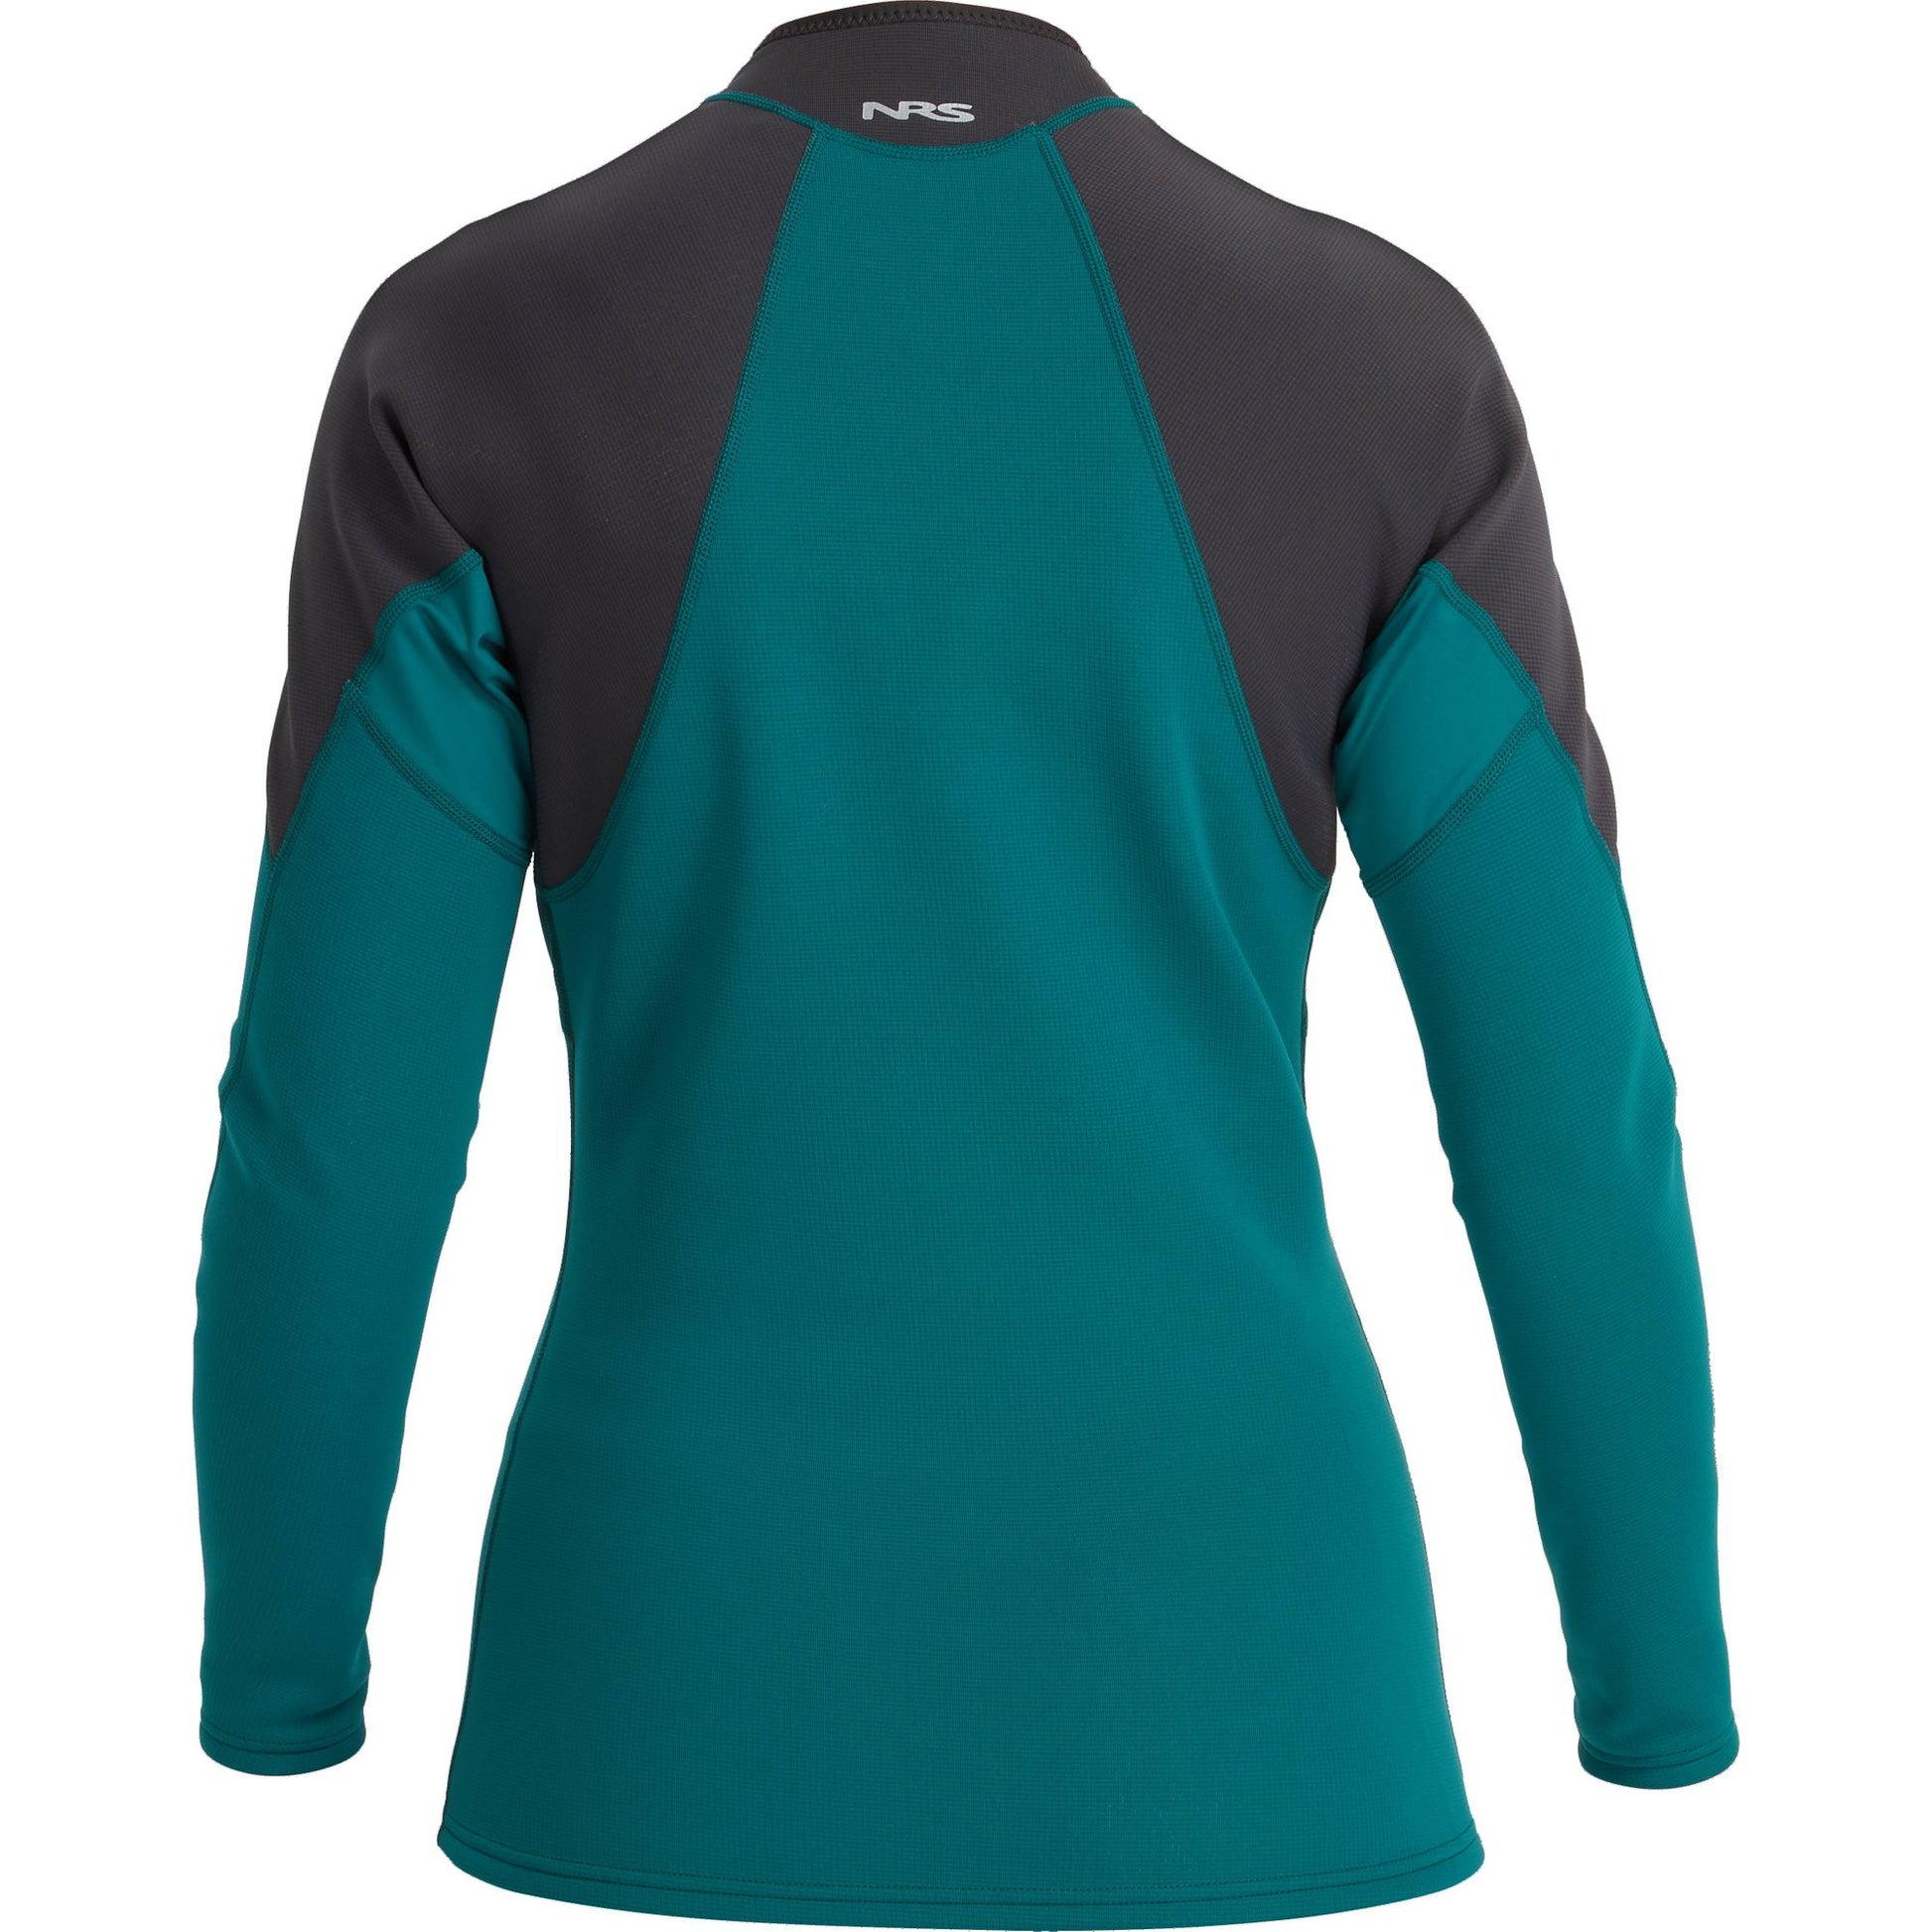 The back view of a NRS Hydroskin 0.5 Jacket - Women's wetsuit, perfect for layering in your water sports arsenal.